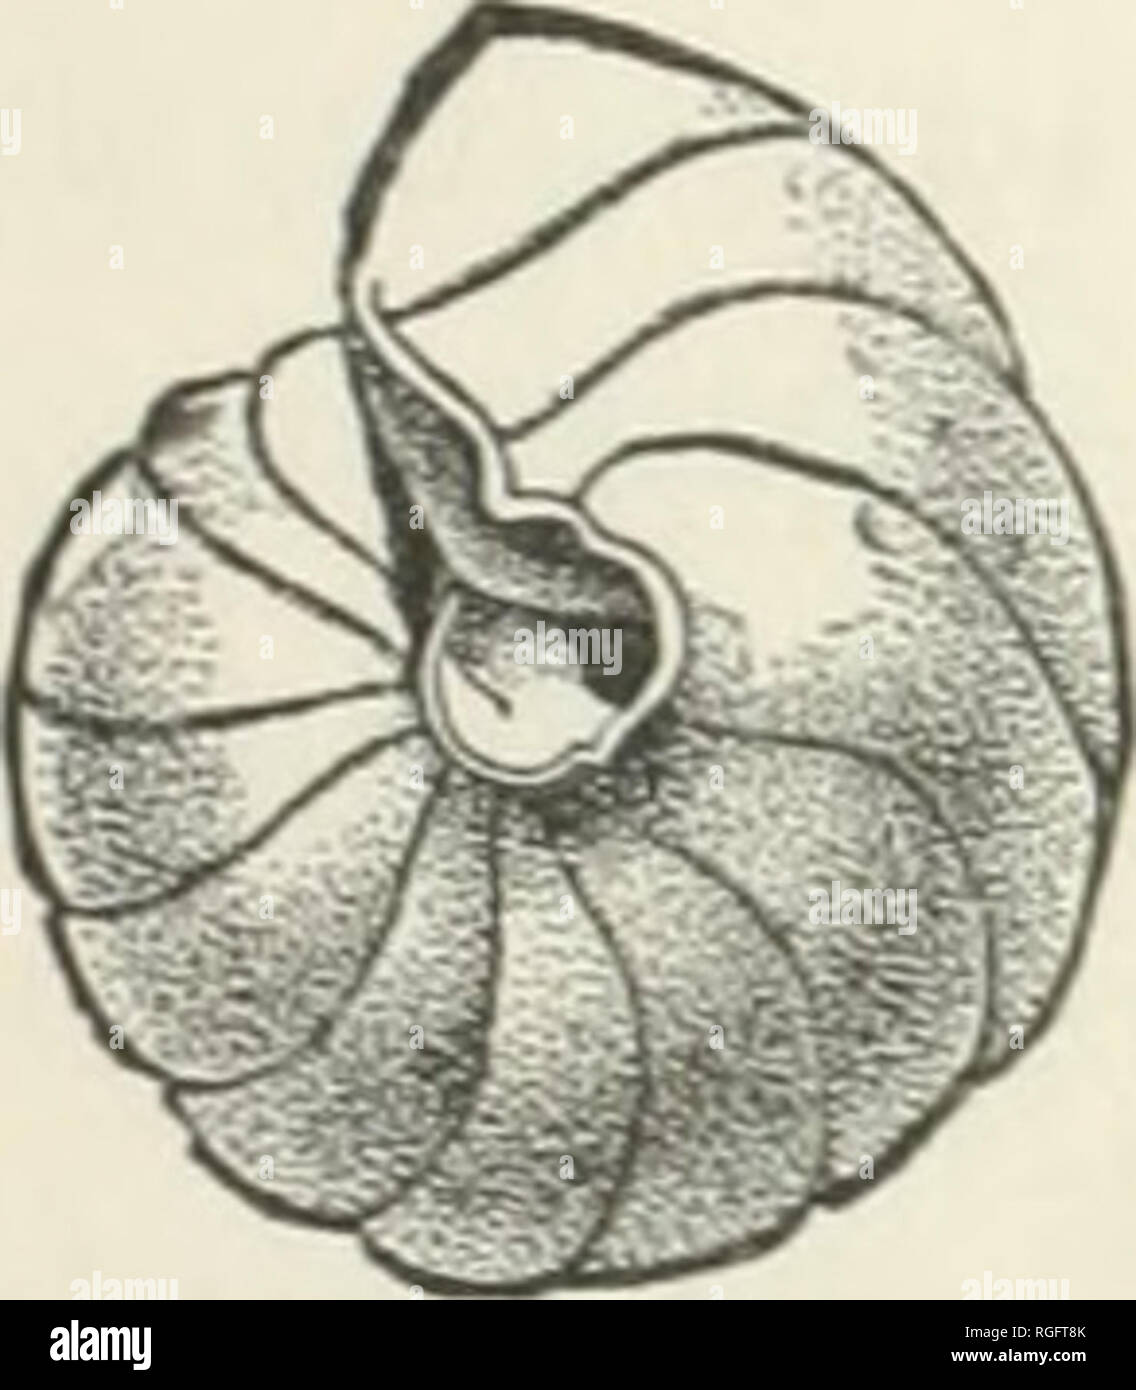 . Bulletin of the Museum of Comparative Zoology at Harvard College. Zoology; Zoology. Fig. 516. Fig. 517. Pulvinulina Menardii. f. (Goes.). line species, and its ally, P. Menardii (Figs. 516, 517), is one of the most common deep-water species. It is also pelagic. Another deep-water form is Truncatulina Un- geriana. (Fig. 518.) The little Polytrema miniaceum (Fig. 519) is a delicate red parasitic foraminifer, occurring everywhere in the West Indies, which resembles certain mi- nute corals. It has a long geological history, dating back to the devonian. Of the Nummuli- nidae, Polystomella erispa Stock Photo